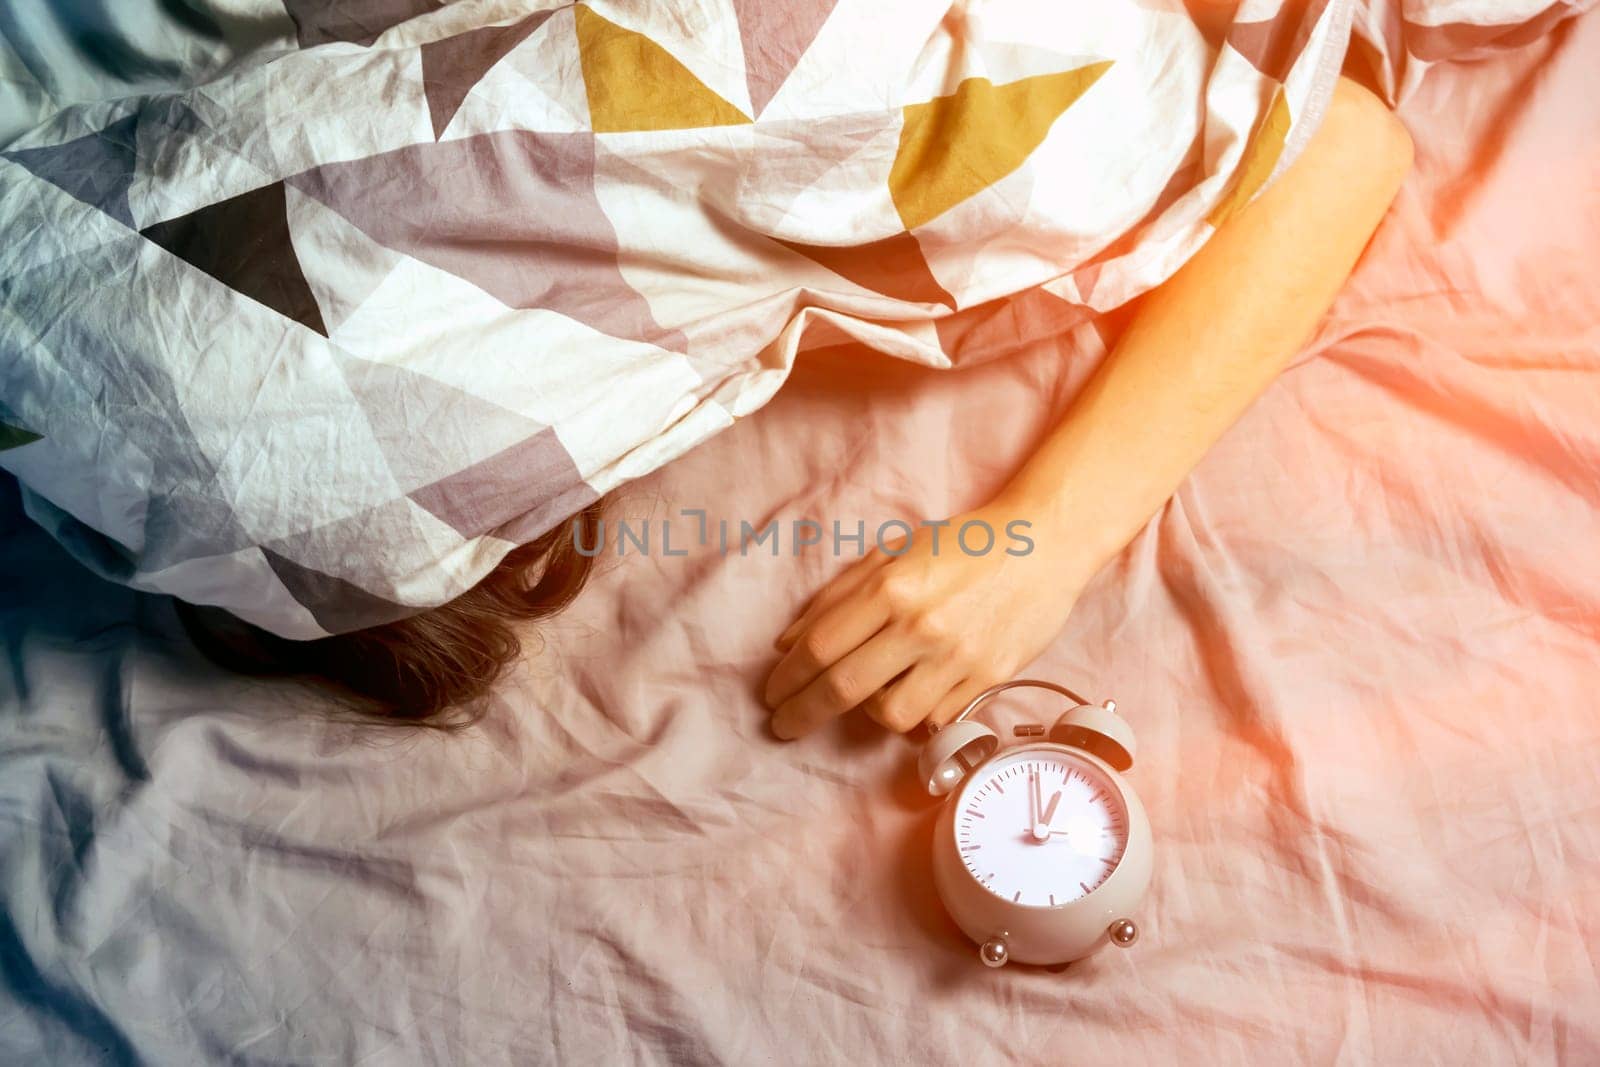 A young girl sleeps early in the morning under the blanket, a vintage alarm clock is near by her.